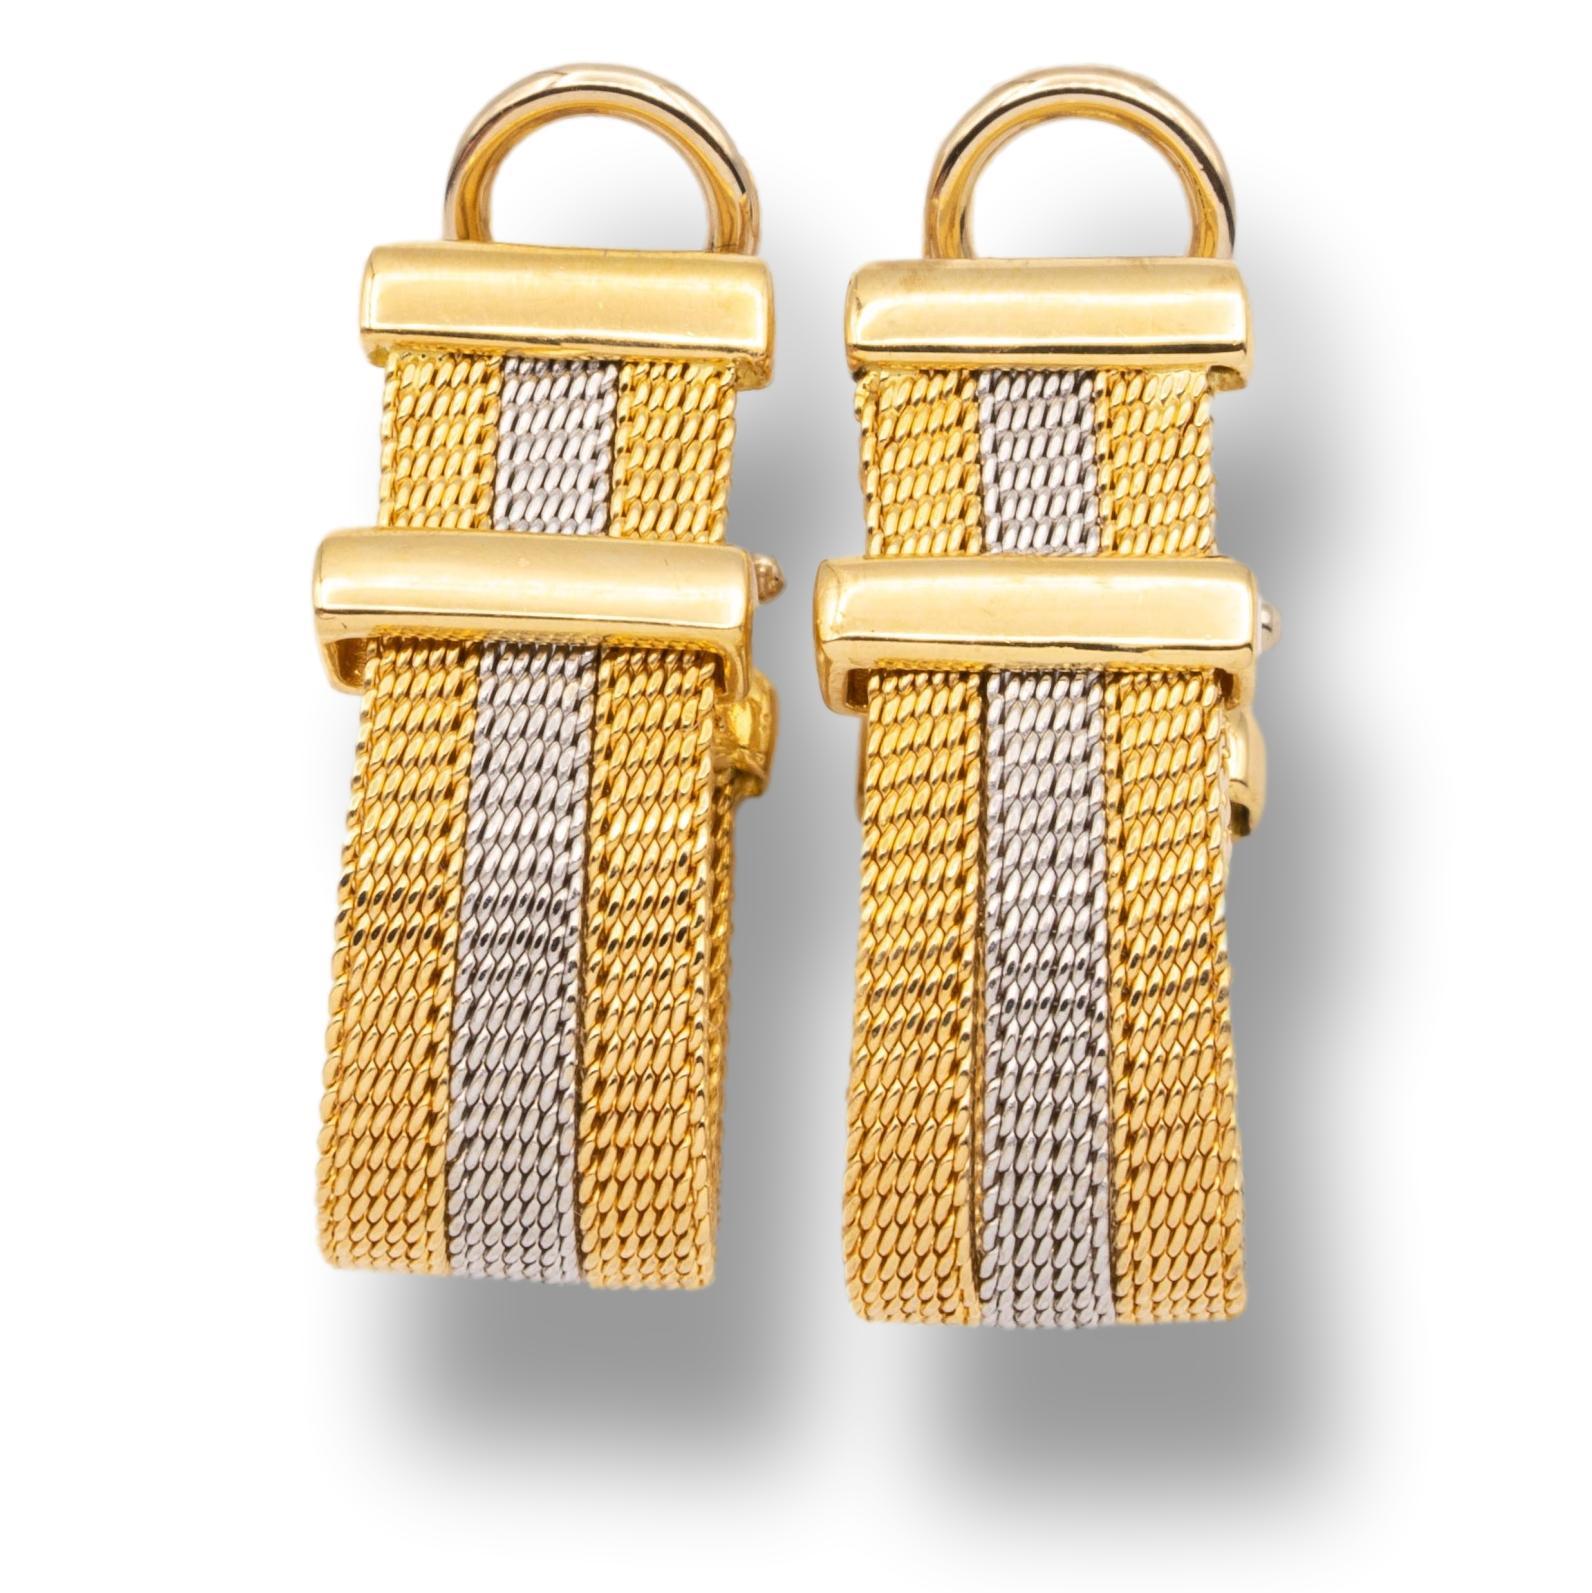 Pair of vintage gold mesh two tone half hoop earrings finely crafted in 18 karat rose and yellow gold with omega clip backs and posts.
Circa 1990's

Stamp: 18K
Weight; 14.4 grams